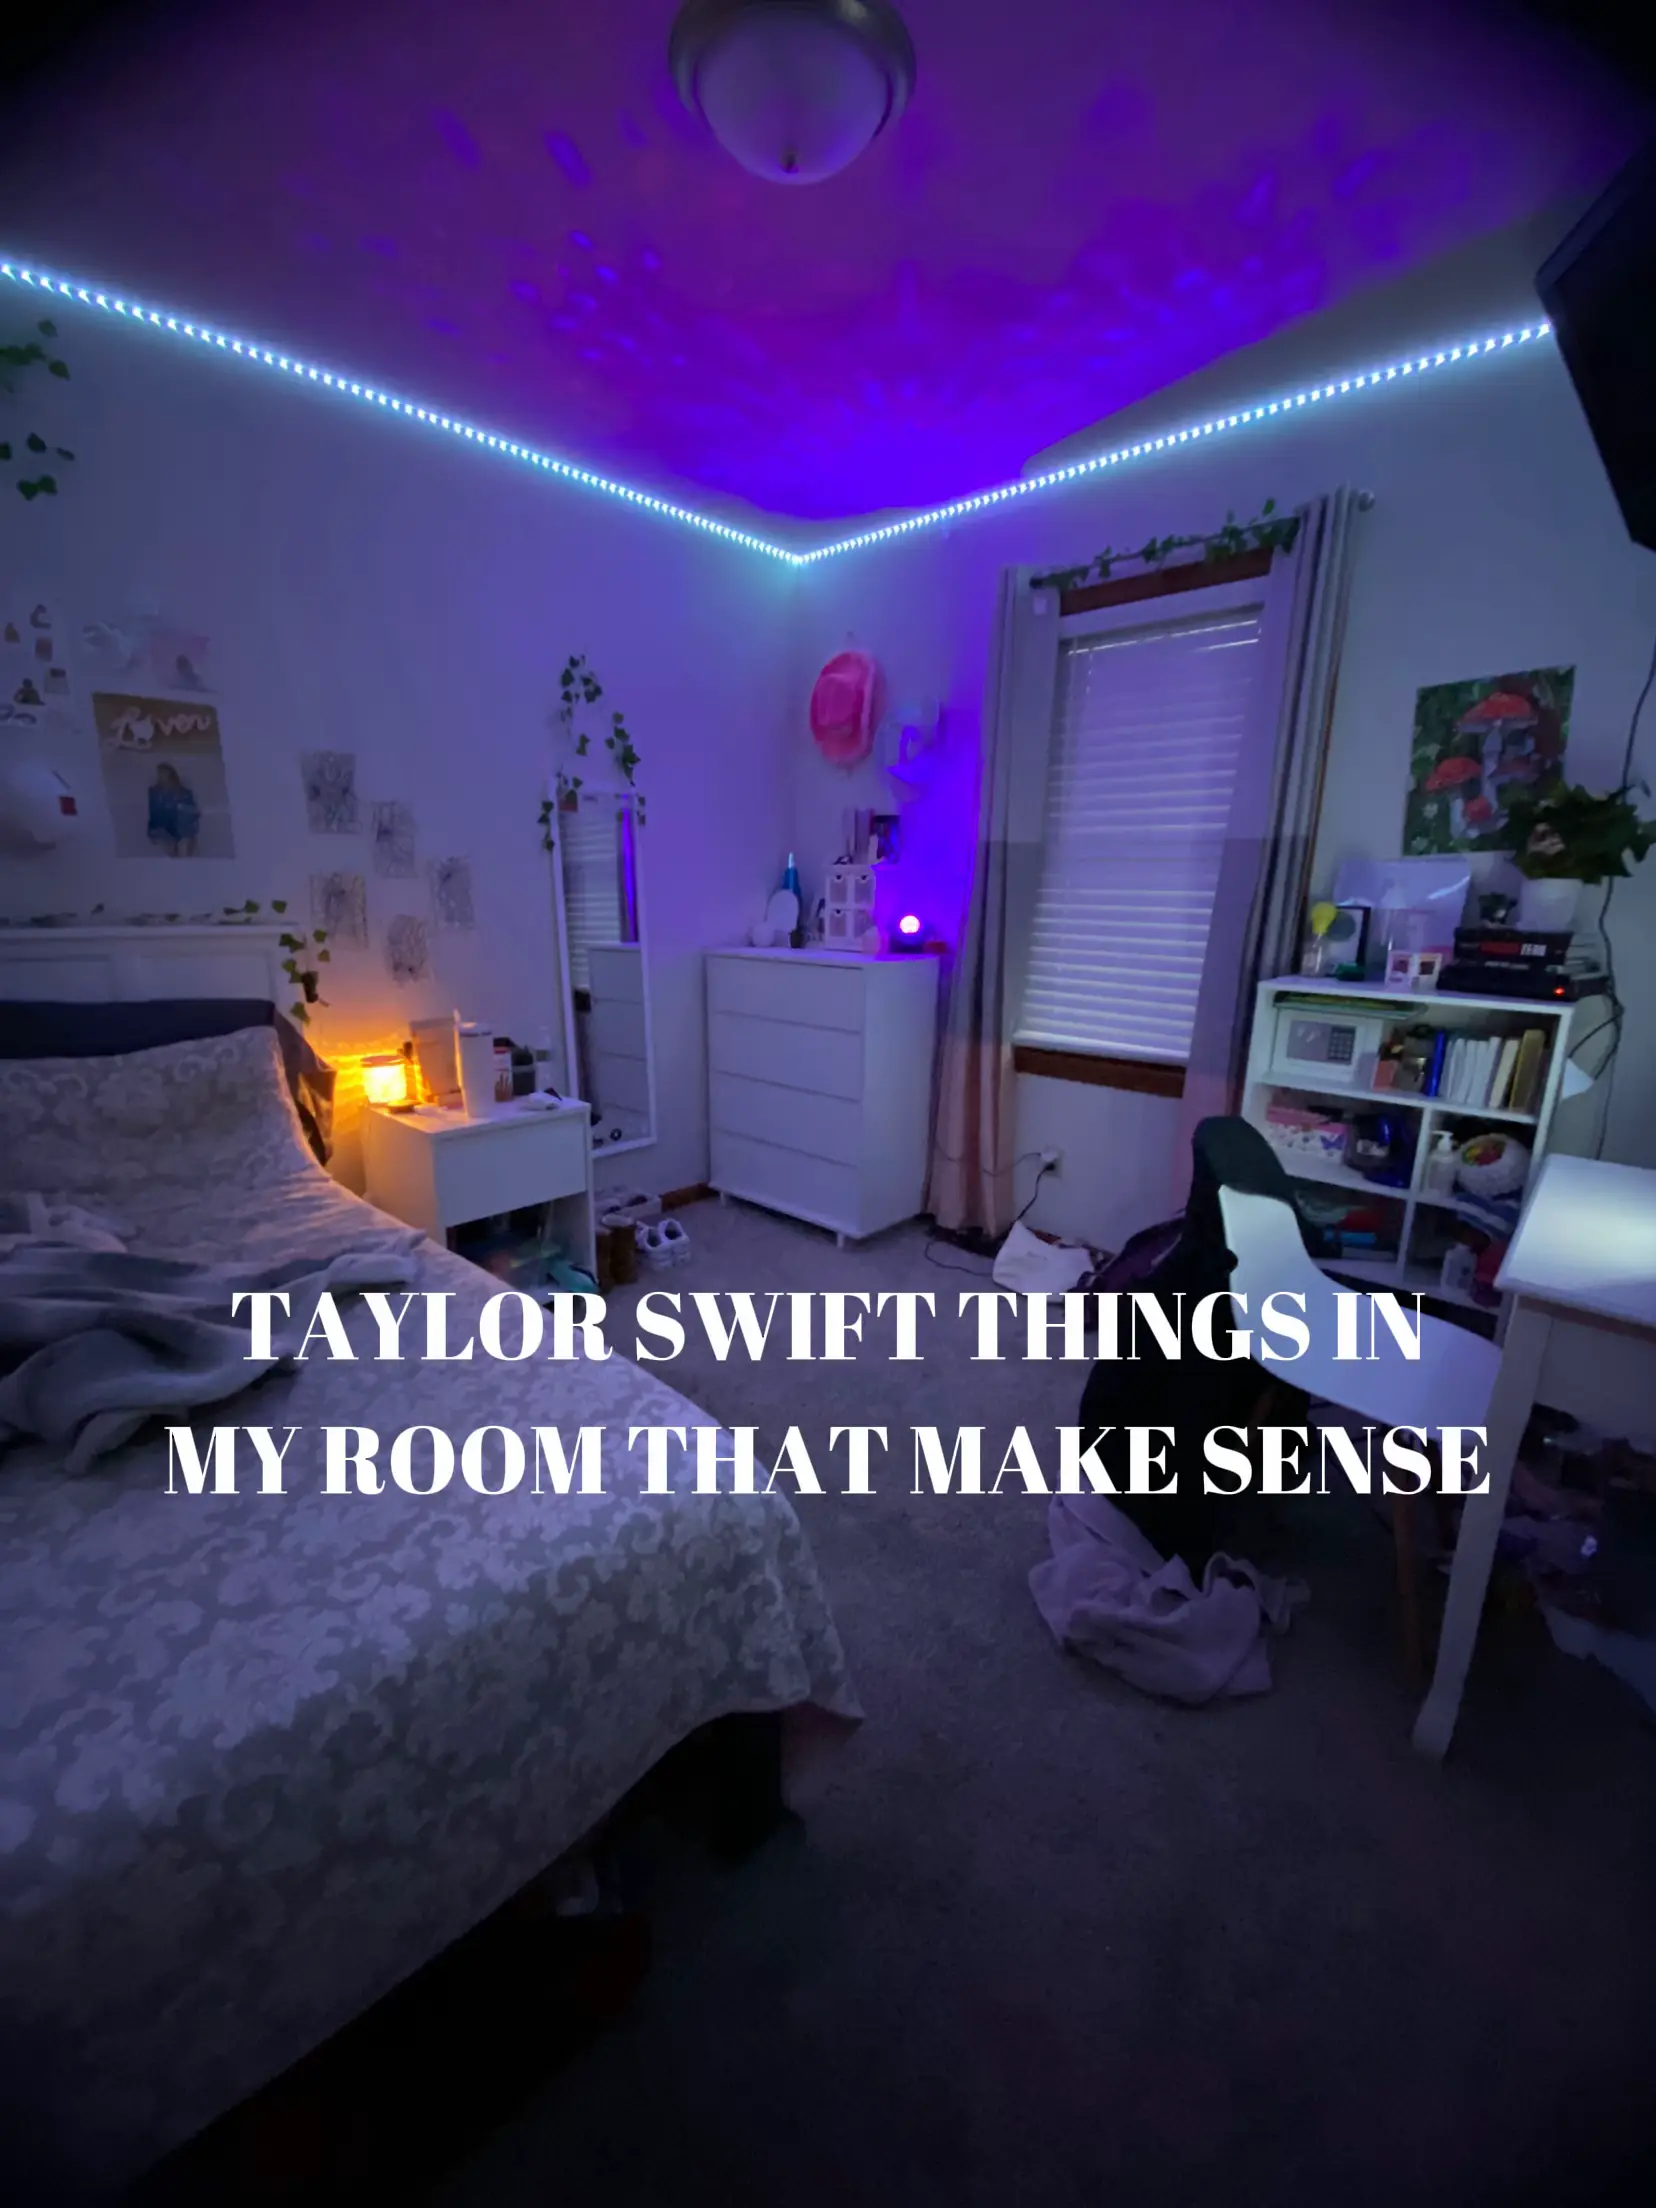 Taylor Swift Bedroom Decor For Swifties💜🩷, Gallery posted by Kendra